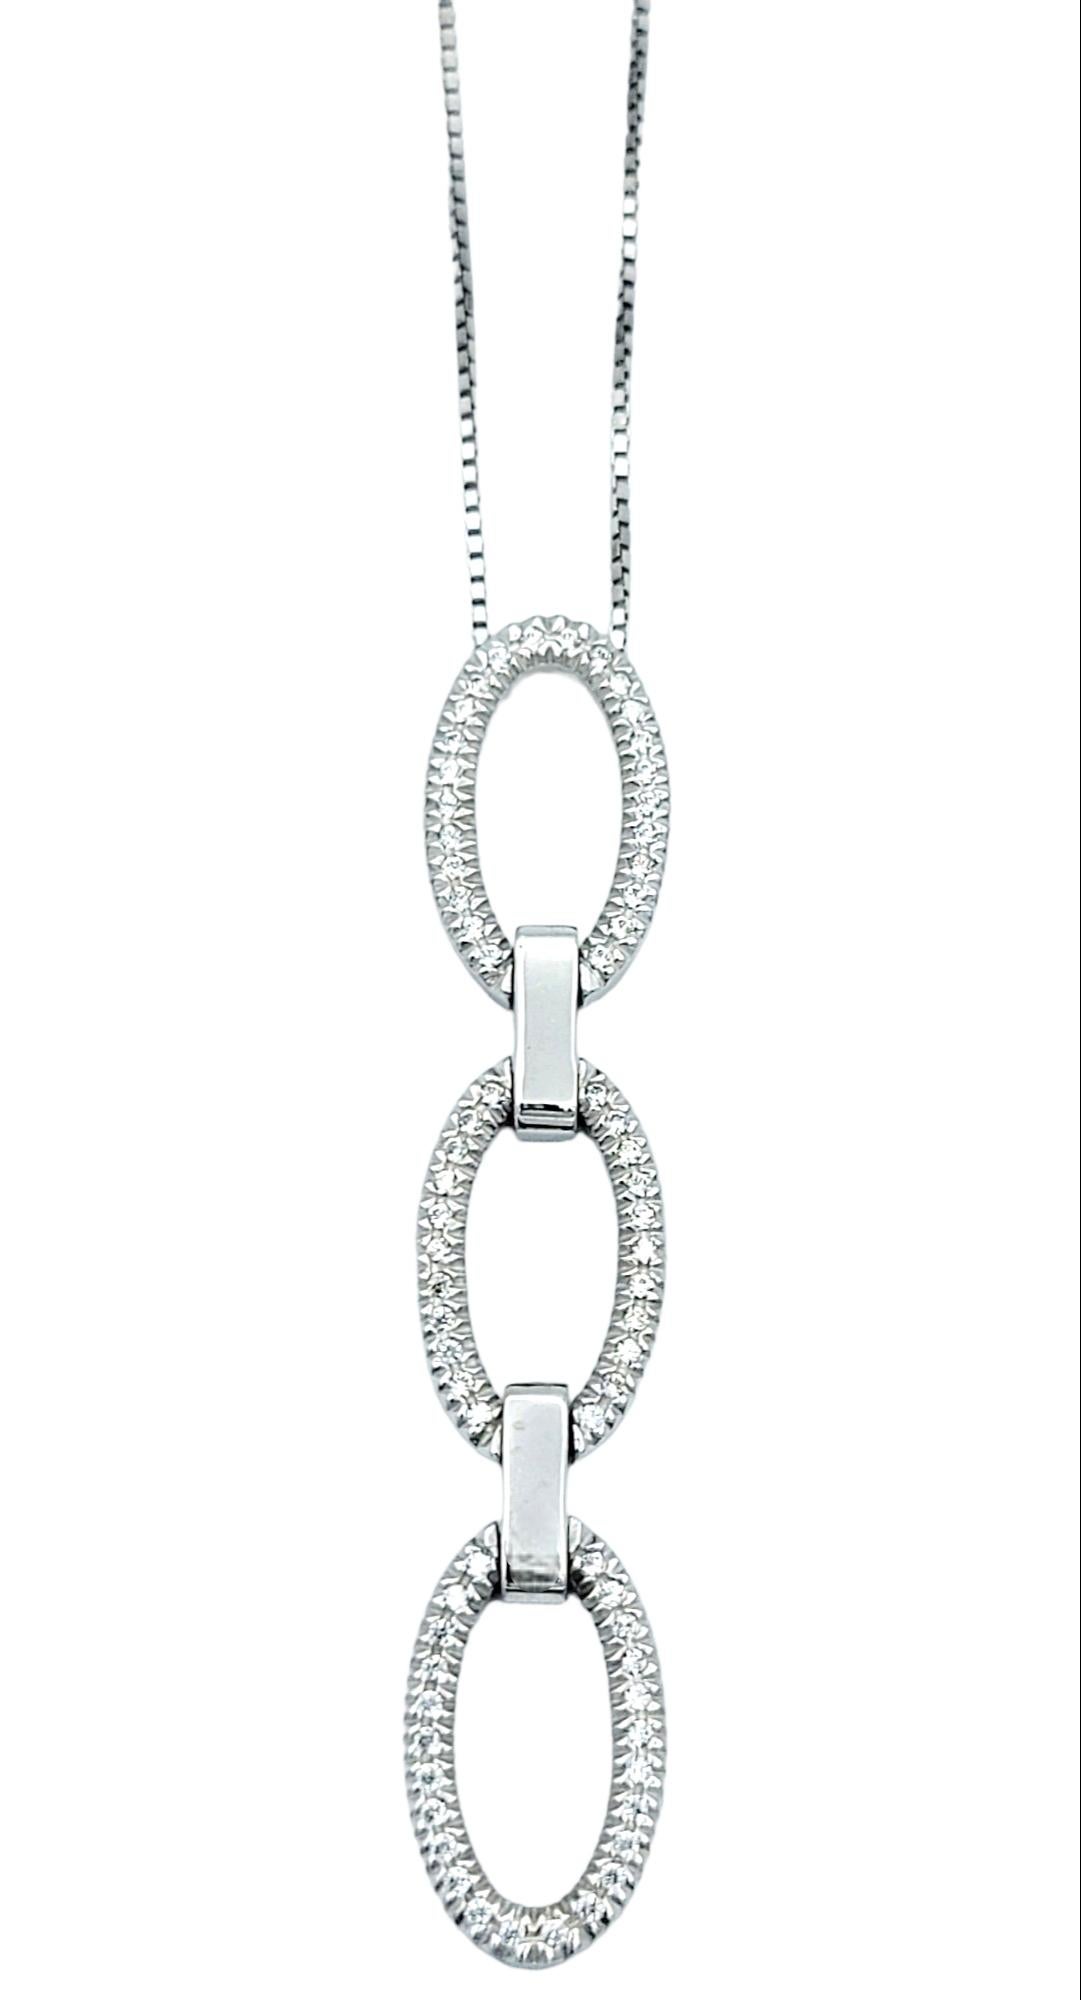 Introducing this stunning pave diamond pendant necklace, a true embodiment of elegance and luxury. Crafted in luxurious 14 karat white gold, this necklace showcases a captivating contemporary design that seamlessly blends modern aesthetics with